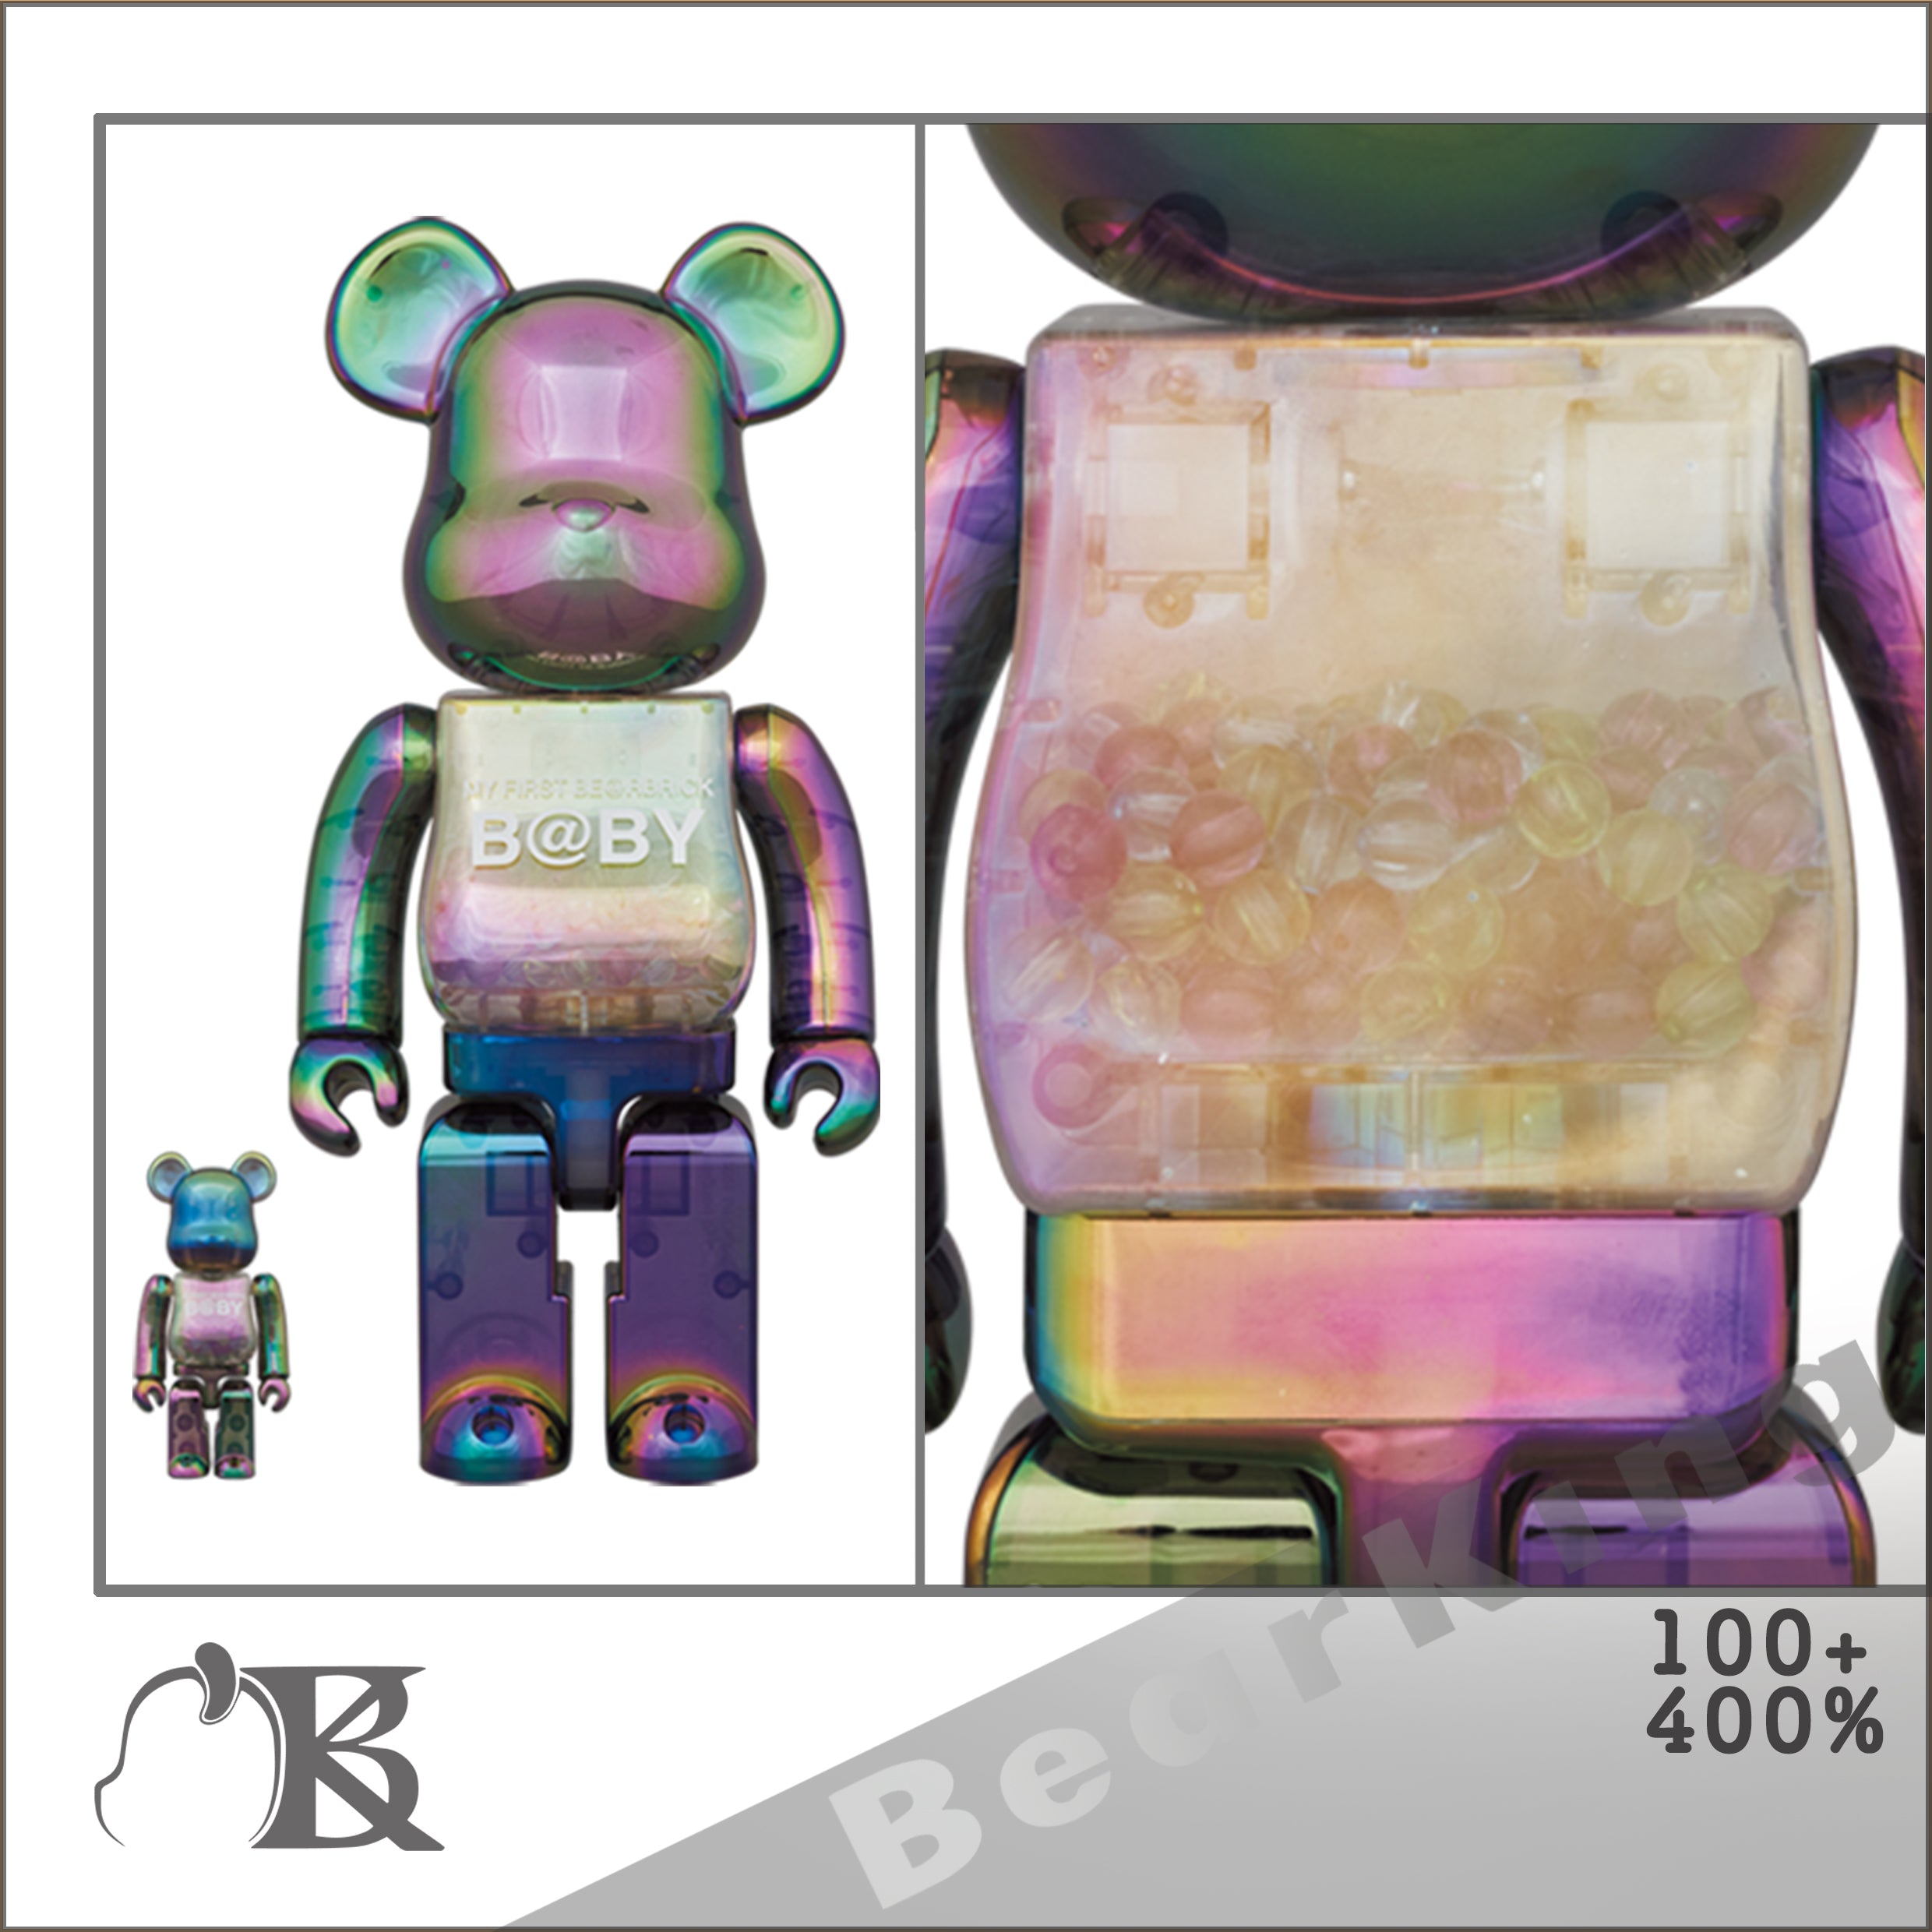 MY FIRST BE@RBRICK B@BY CLEAR BLACK CHROME Ver. 100